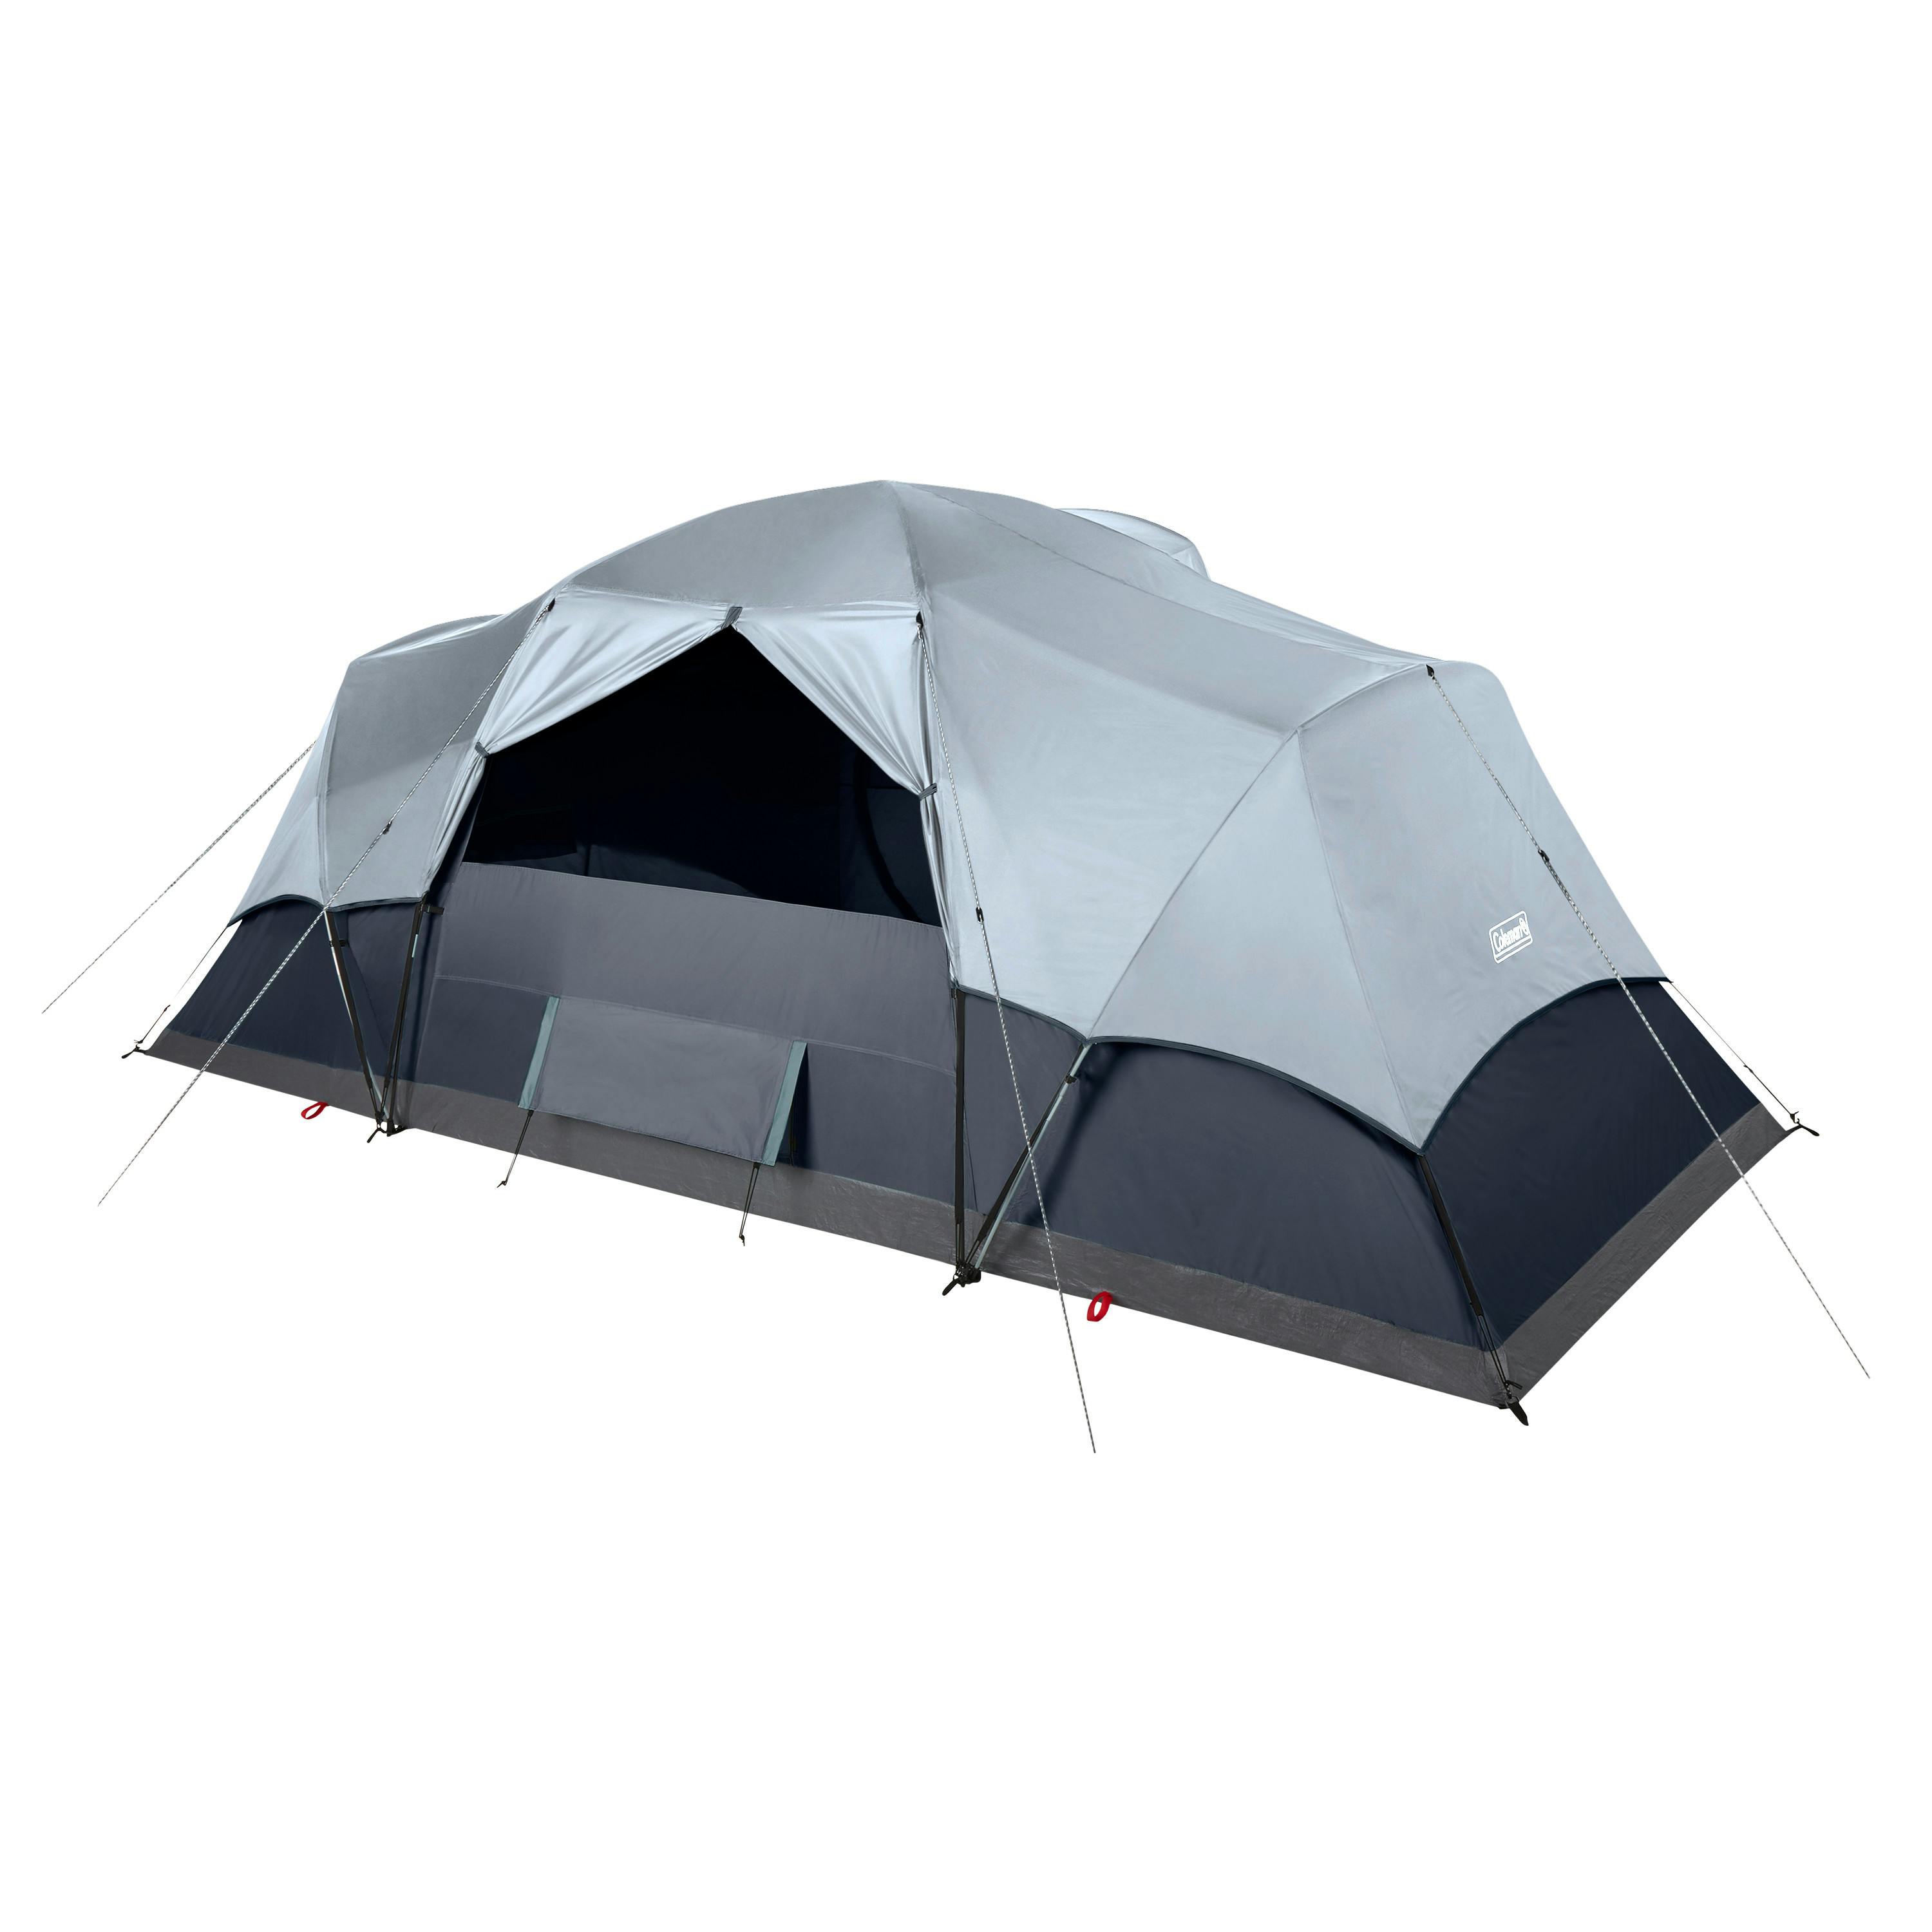 Coleman Skydome XL Camping Tent with LED Lighting · 8 Person · Watersedge